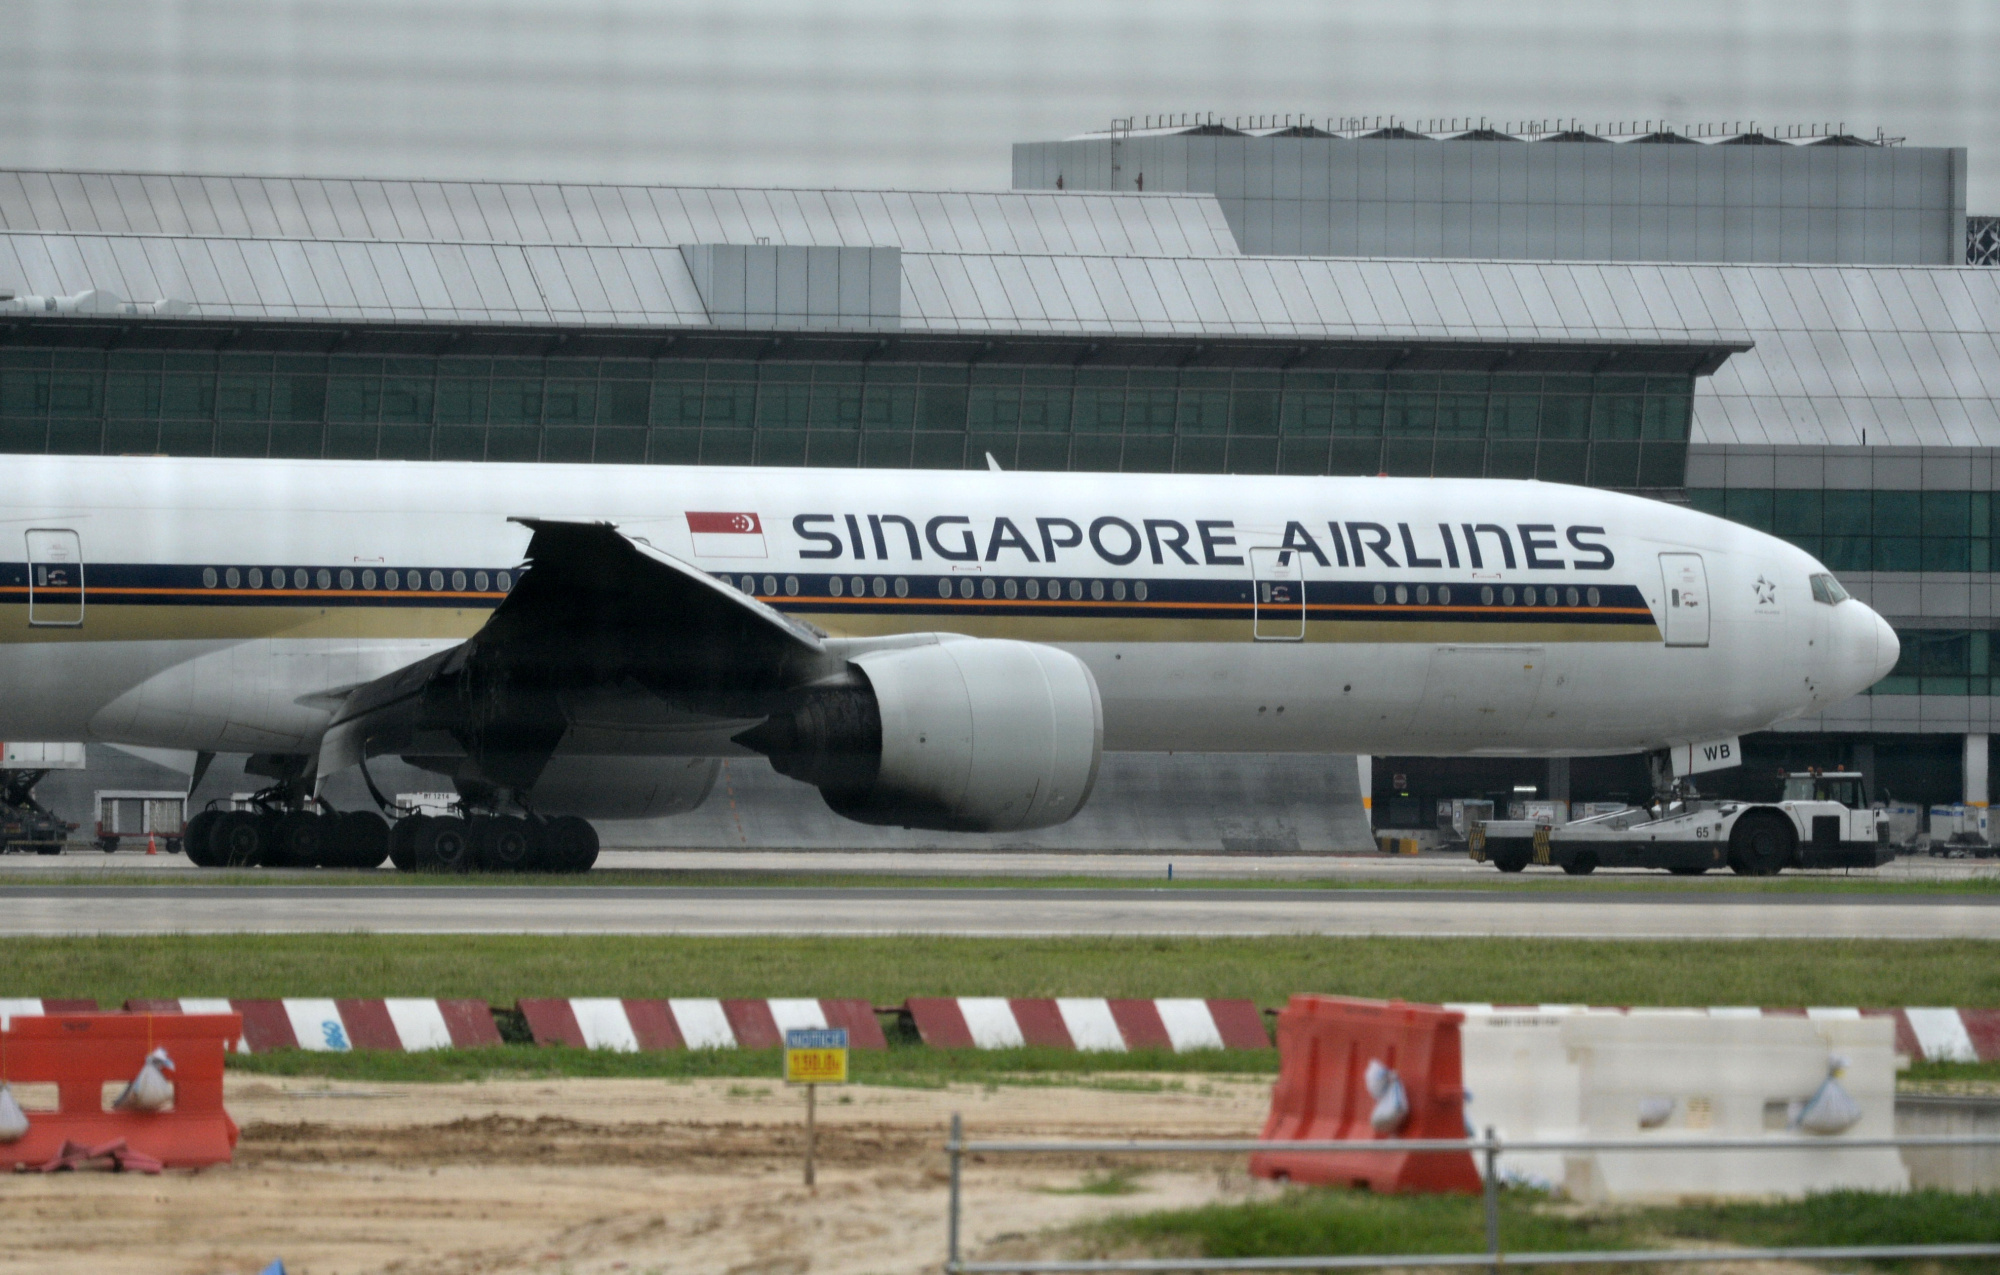 A damaged Singapore Airlines aircraft is towed at Changi airport in Singapore.
